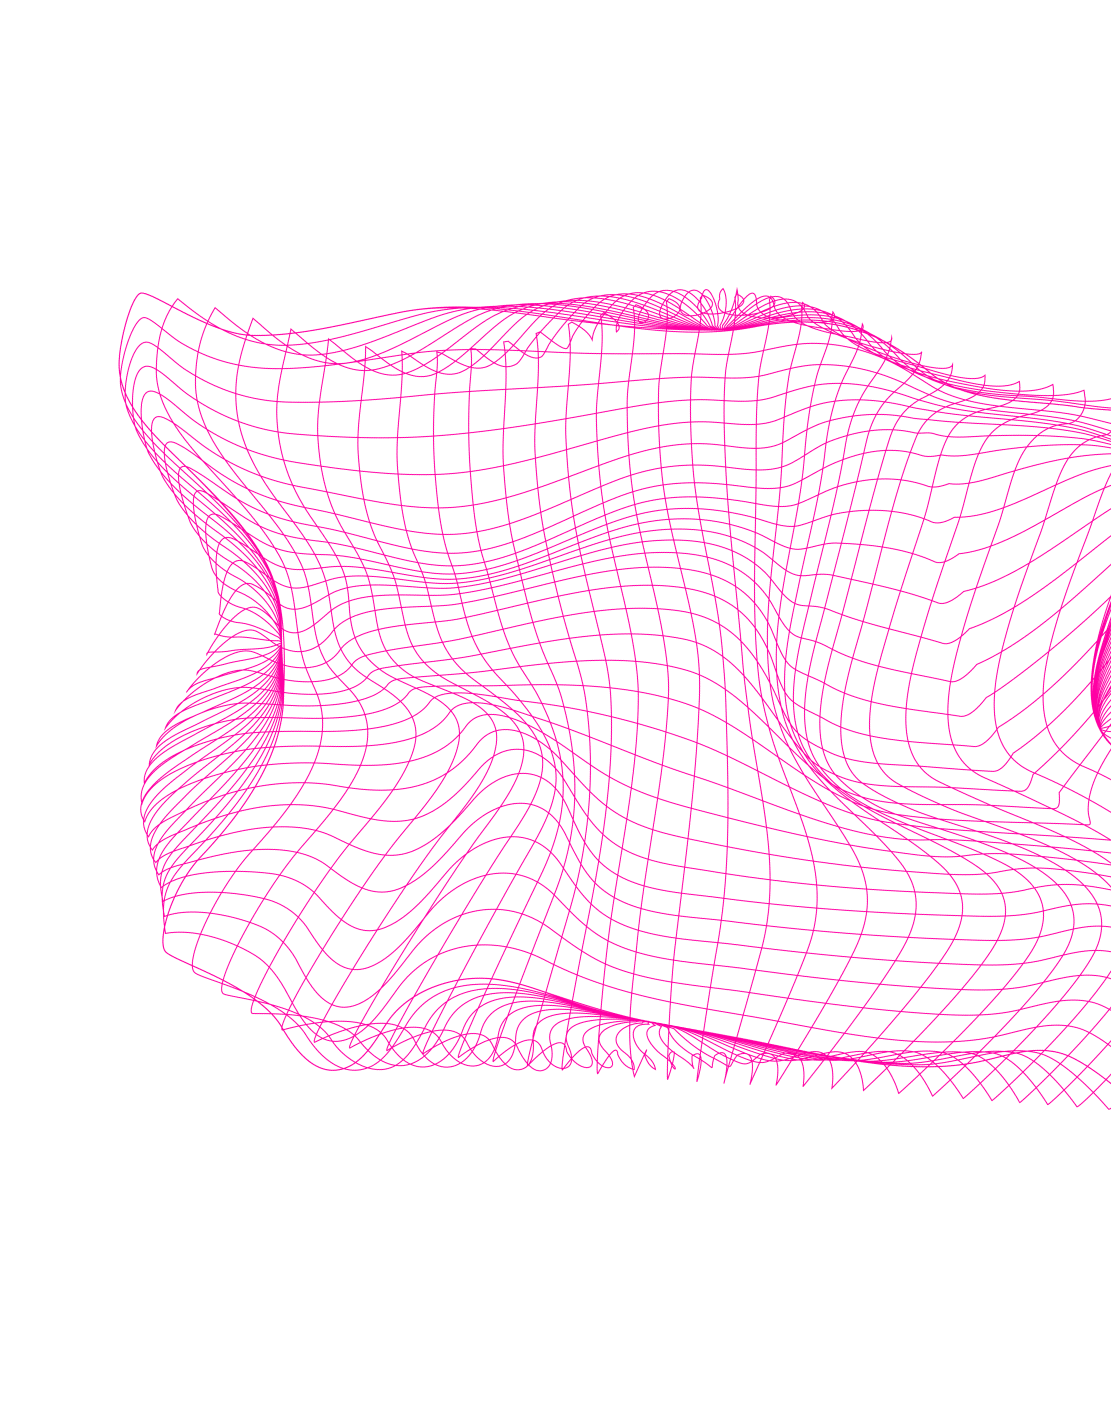 Mesh pink as details for background